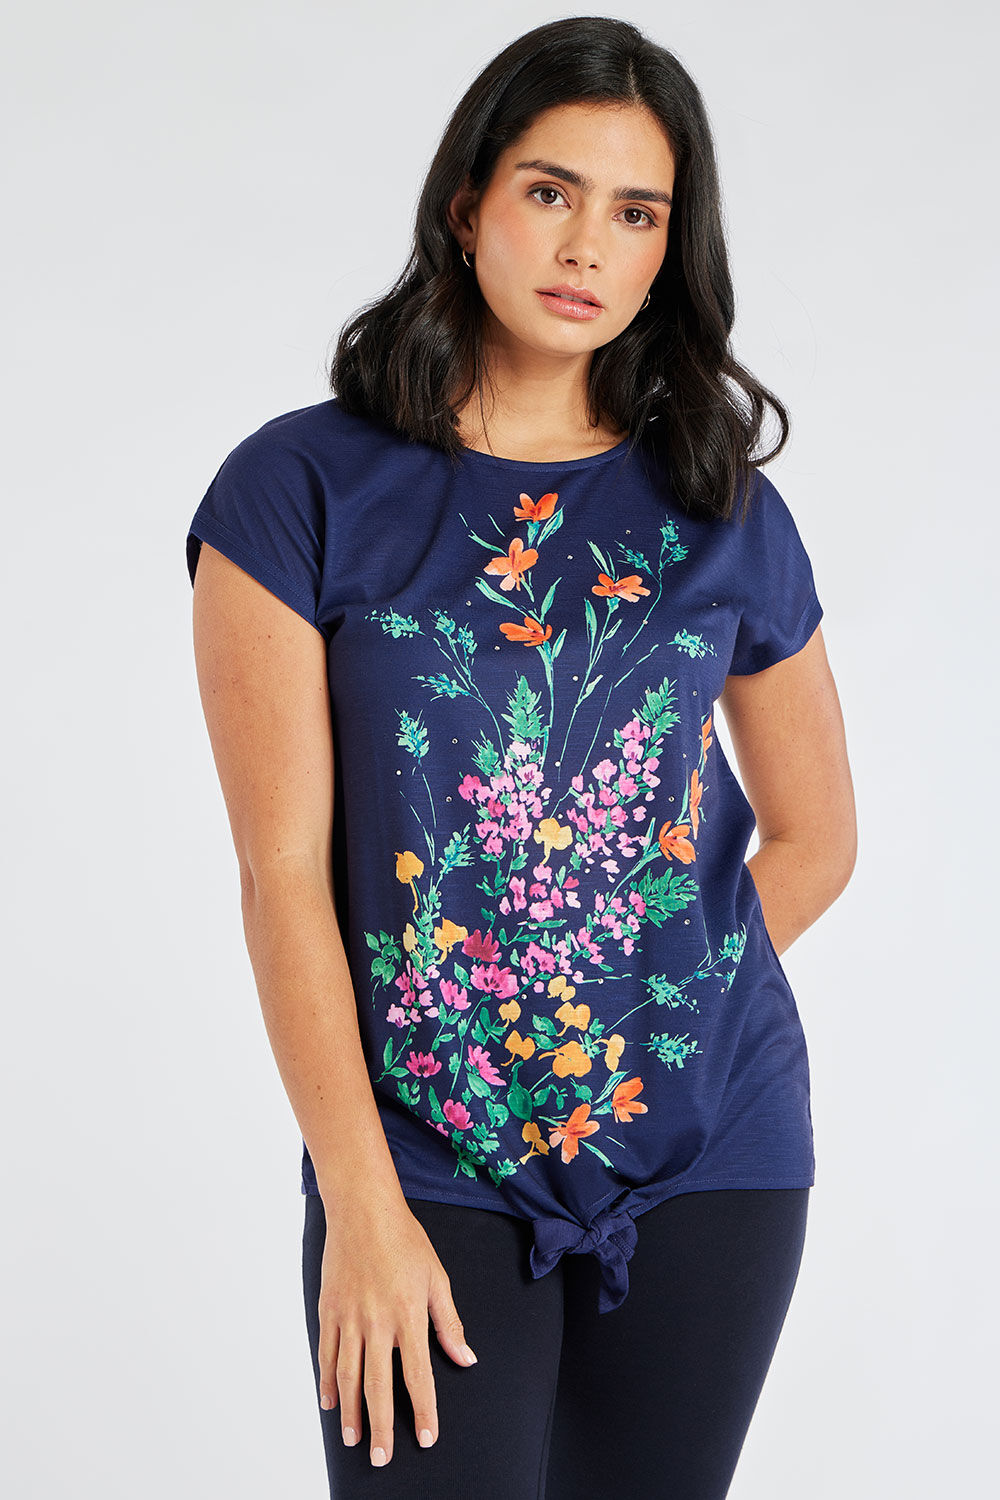 Bonmarche Navy Short Sleeve Sprig Floral Print T-Shirt With Tie Front, Size: 18